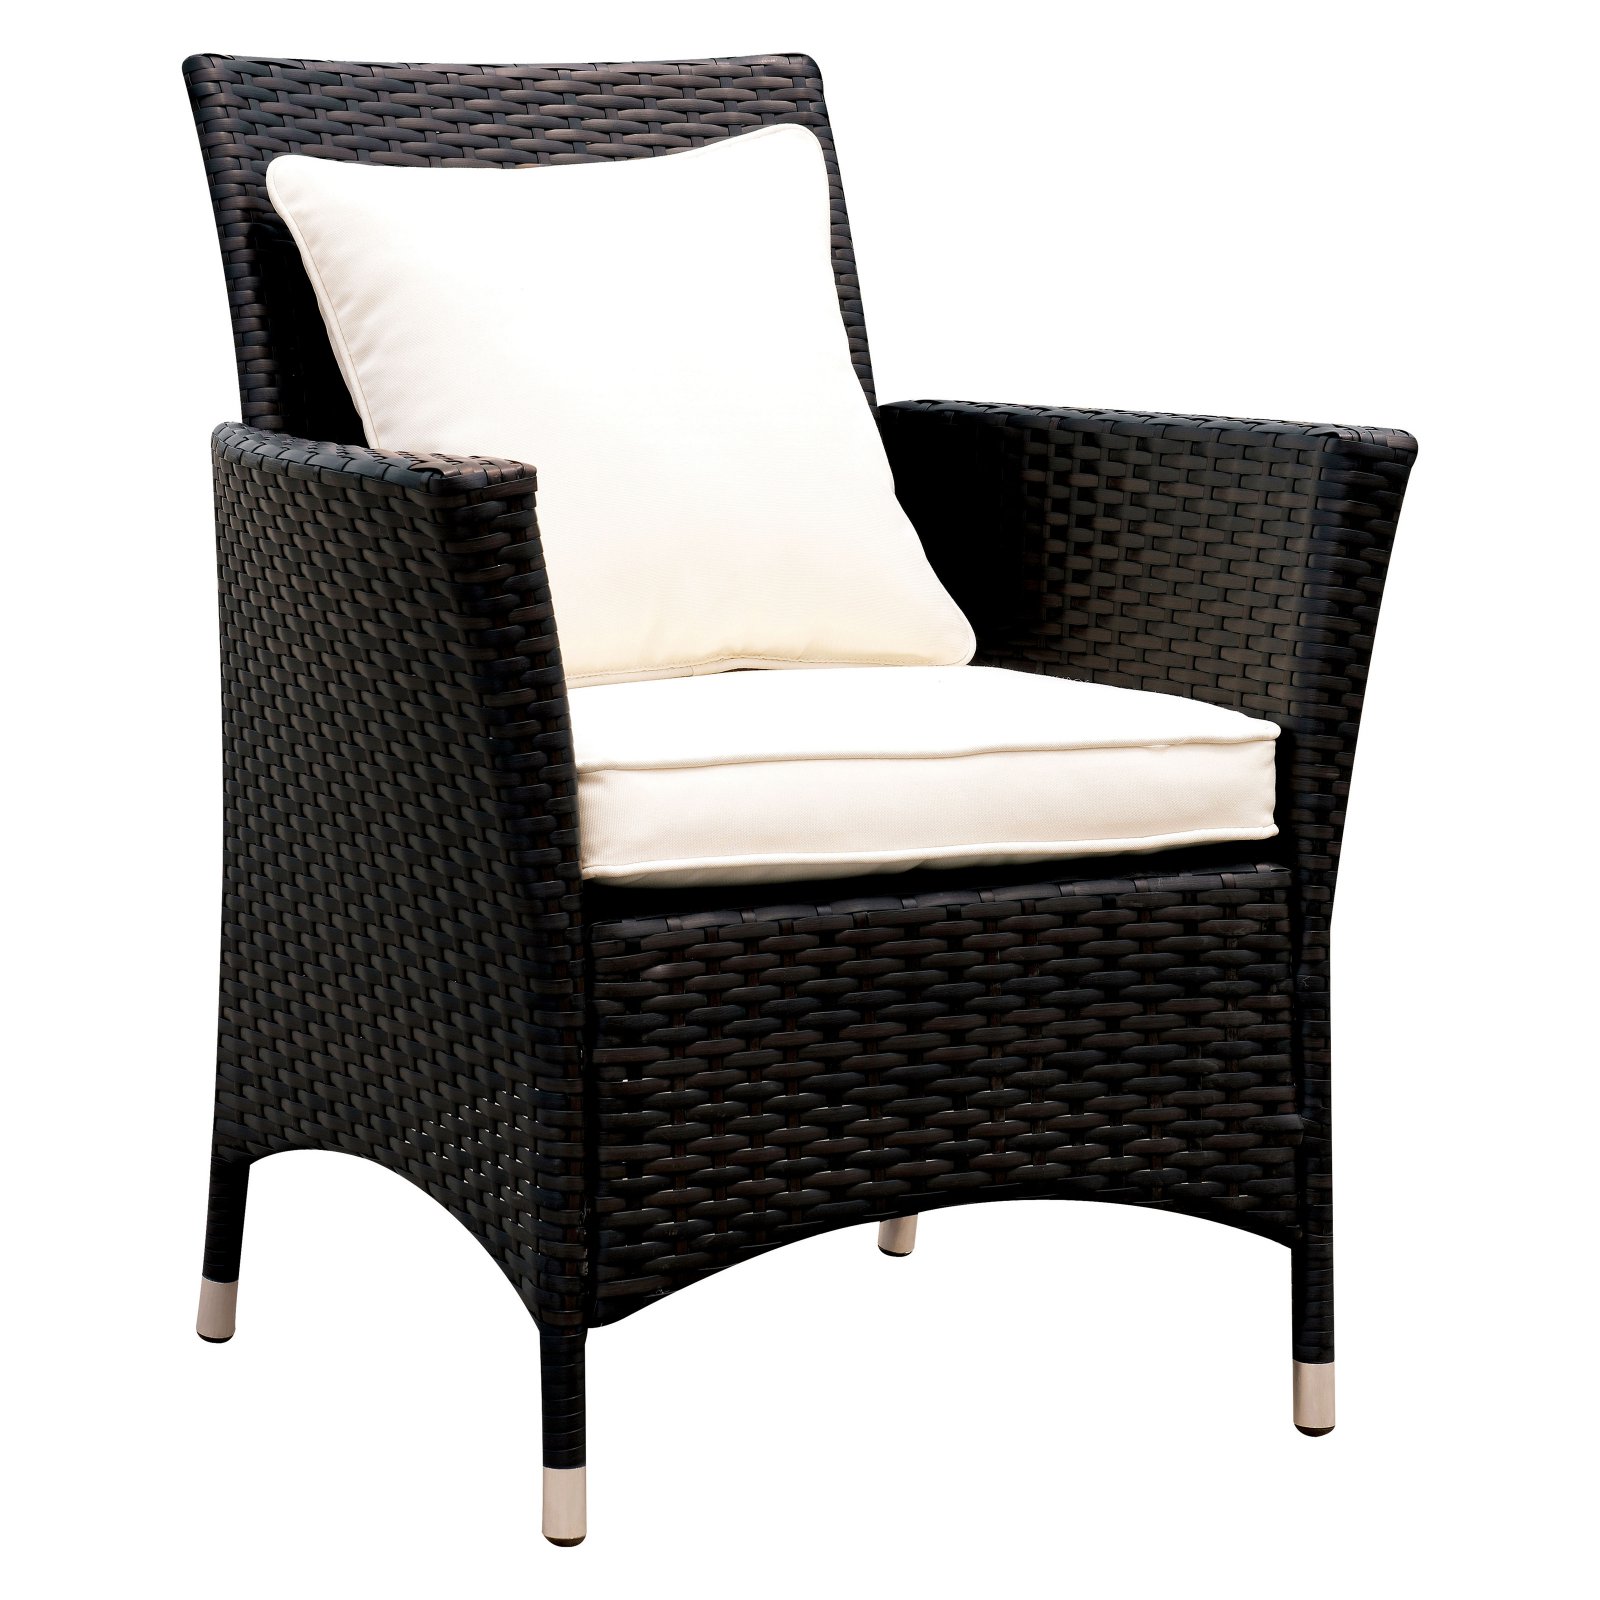 Furniture of America Karrot Contemporary Outdoor Dining Arm Chair - image 1 of 7